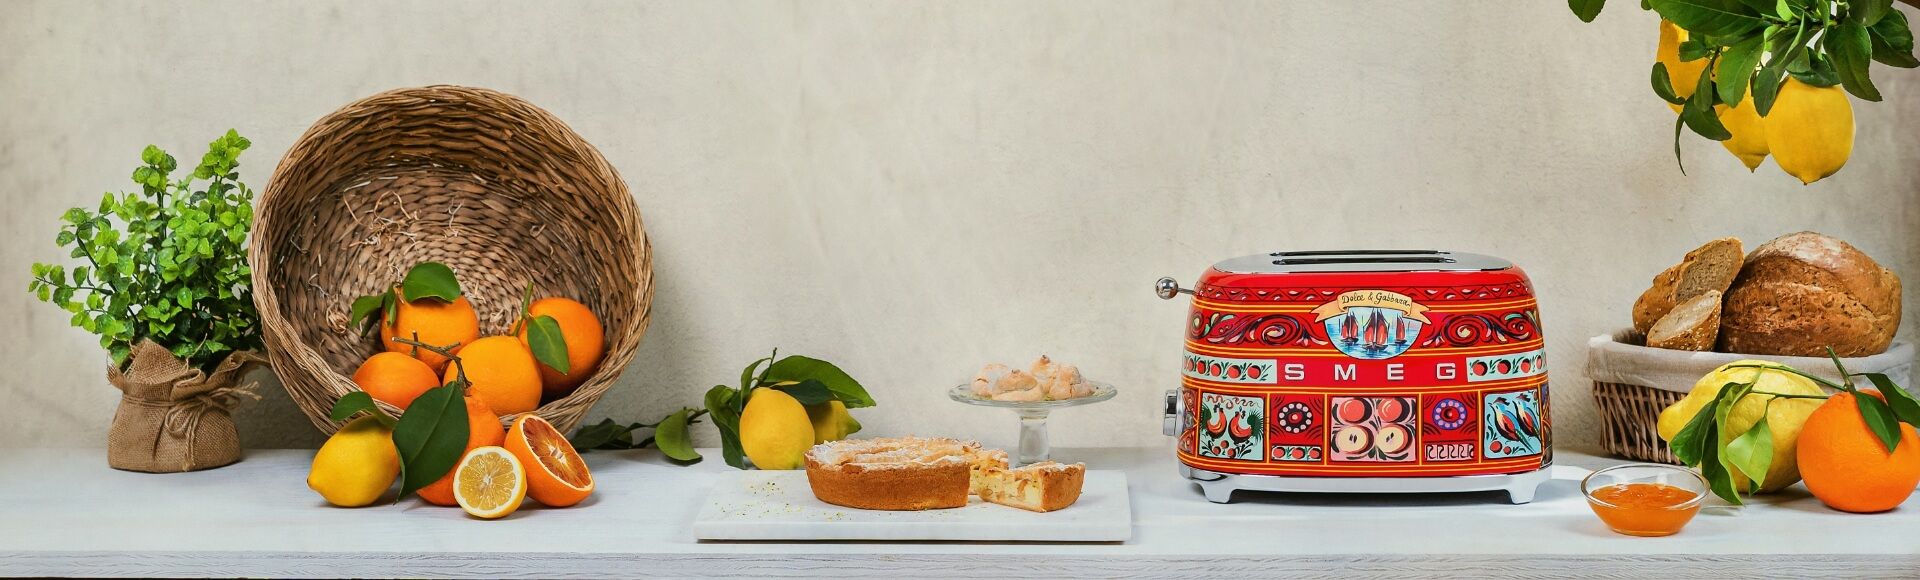 Sicily is my love collection by Smeg and Dolce&Gabbana